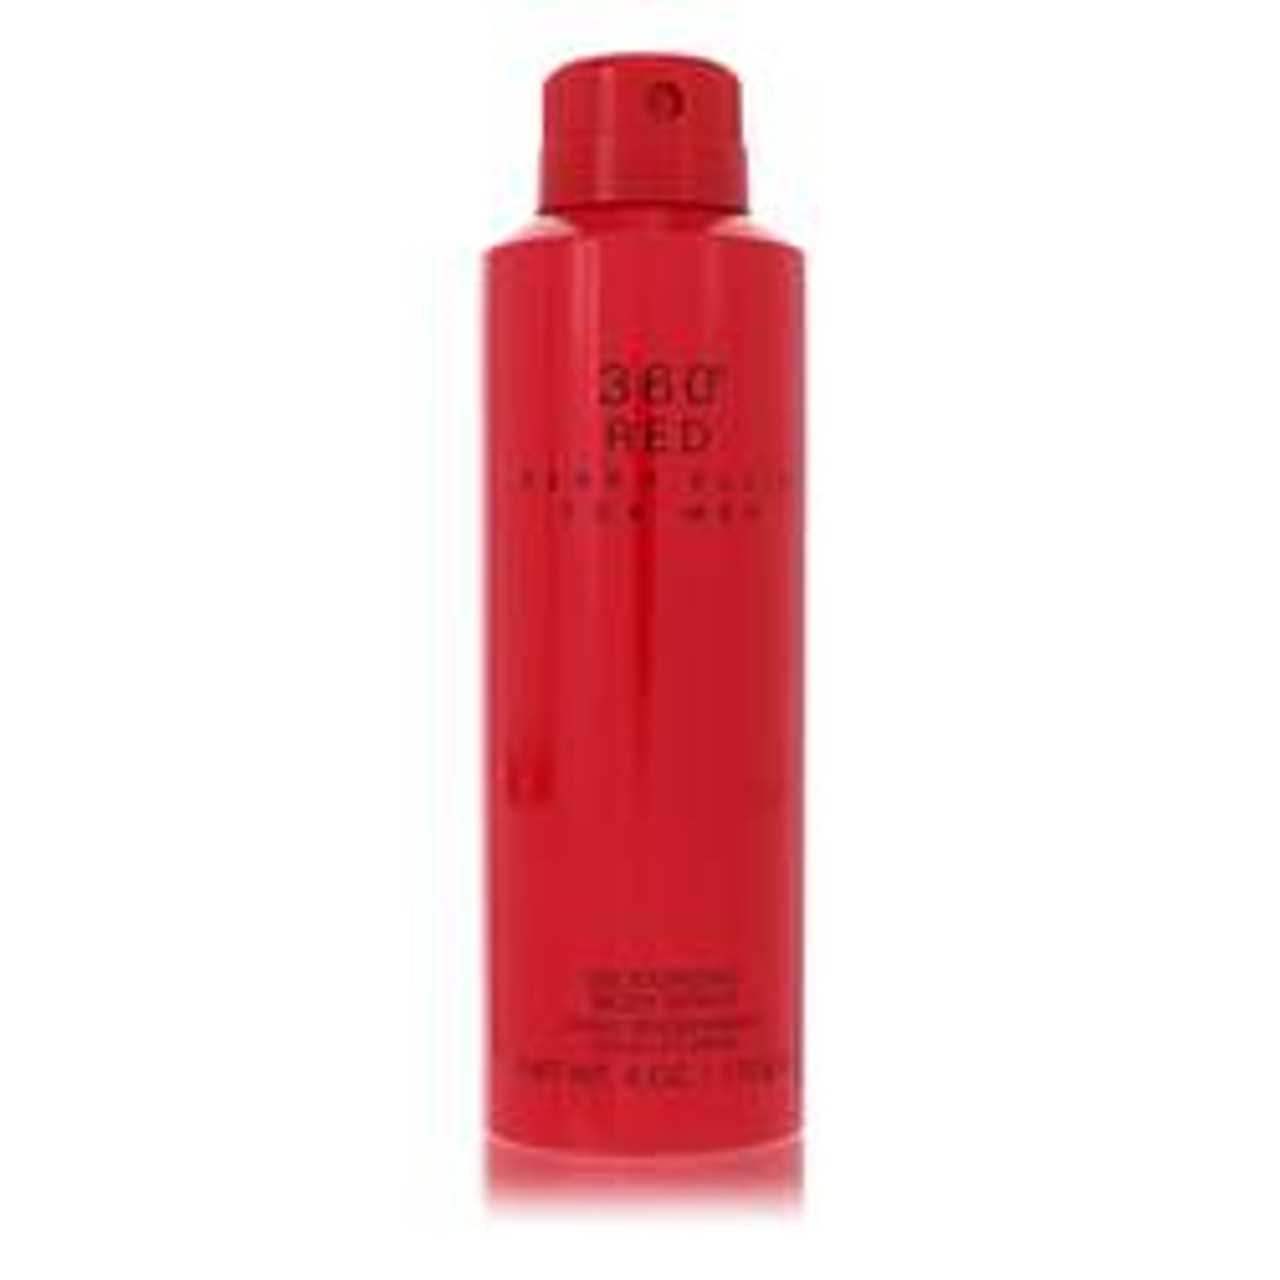 Perry Ellis 360 Red Cologne By Perry Ellis Body Spray 6.8 oz for Men - [From 31.00 - Choose pk Qty ] - *Ships from Miami